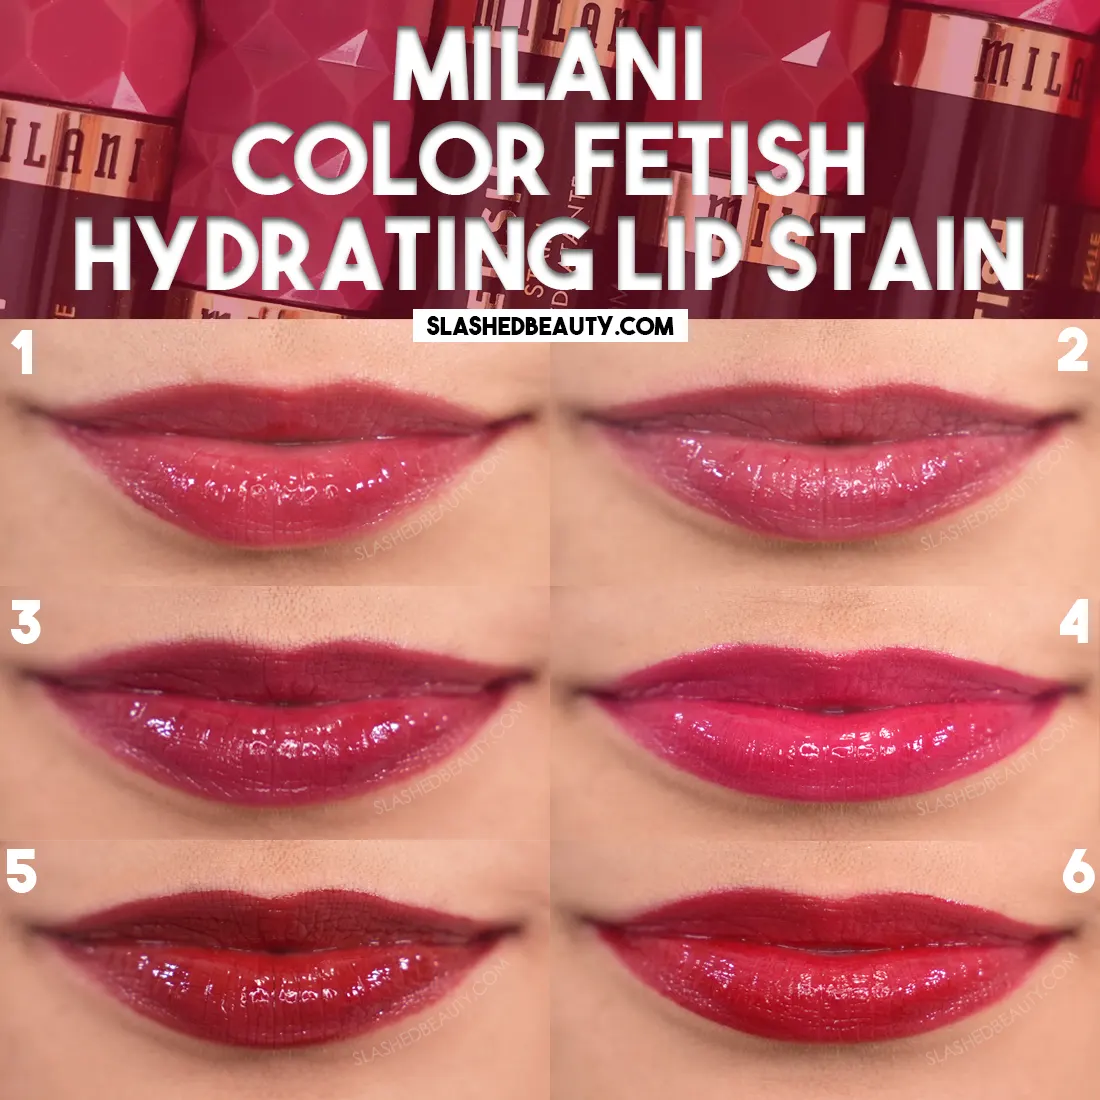 Milani Color Fetish Hydrating Lip Stain swatches on lips | Slashed Beauty